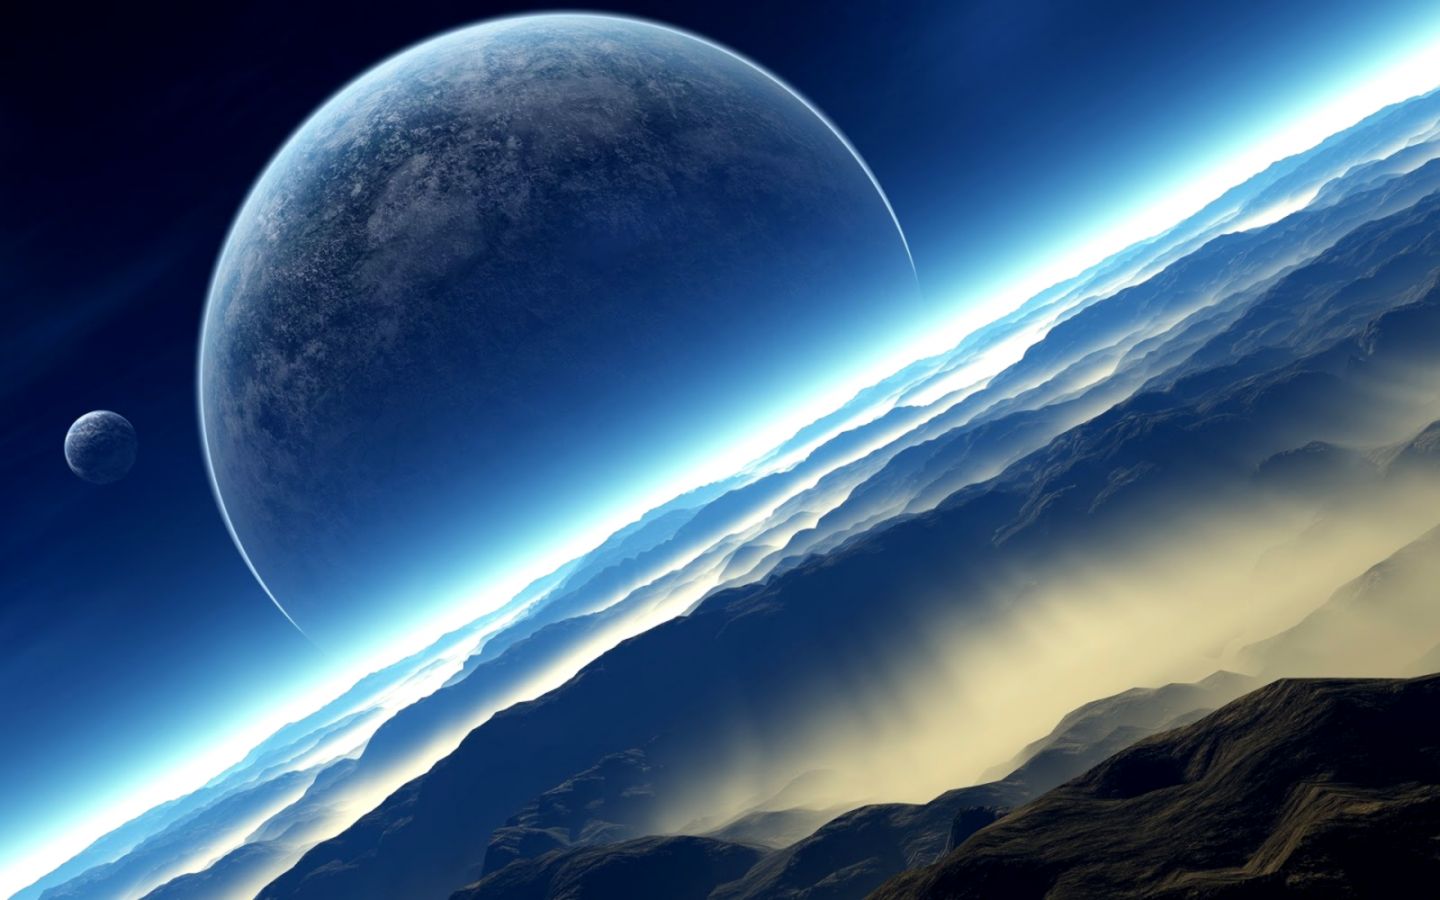 Space Wallpaper Hd 1080p Best Wallpapers Hd Collection